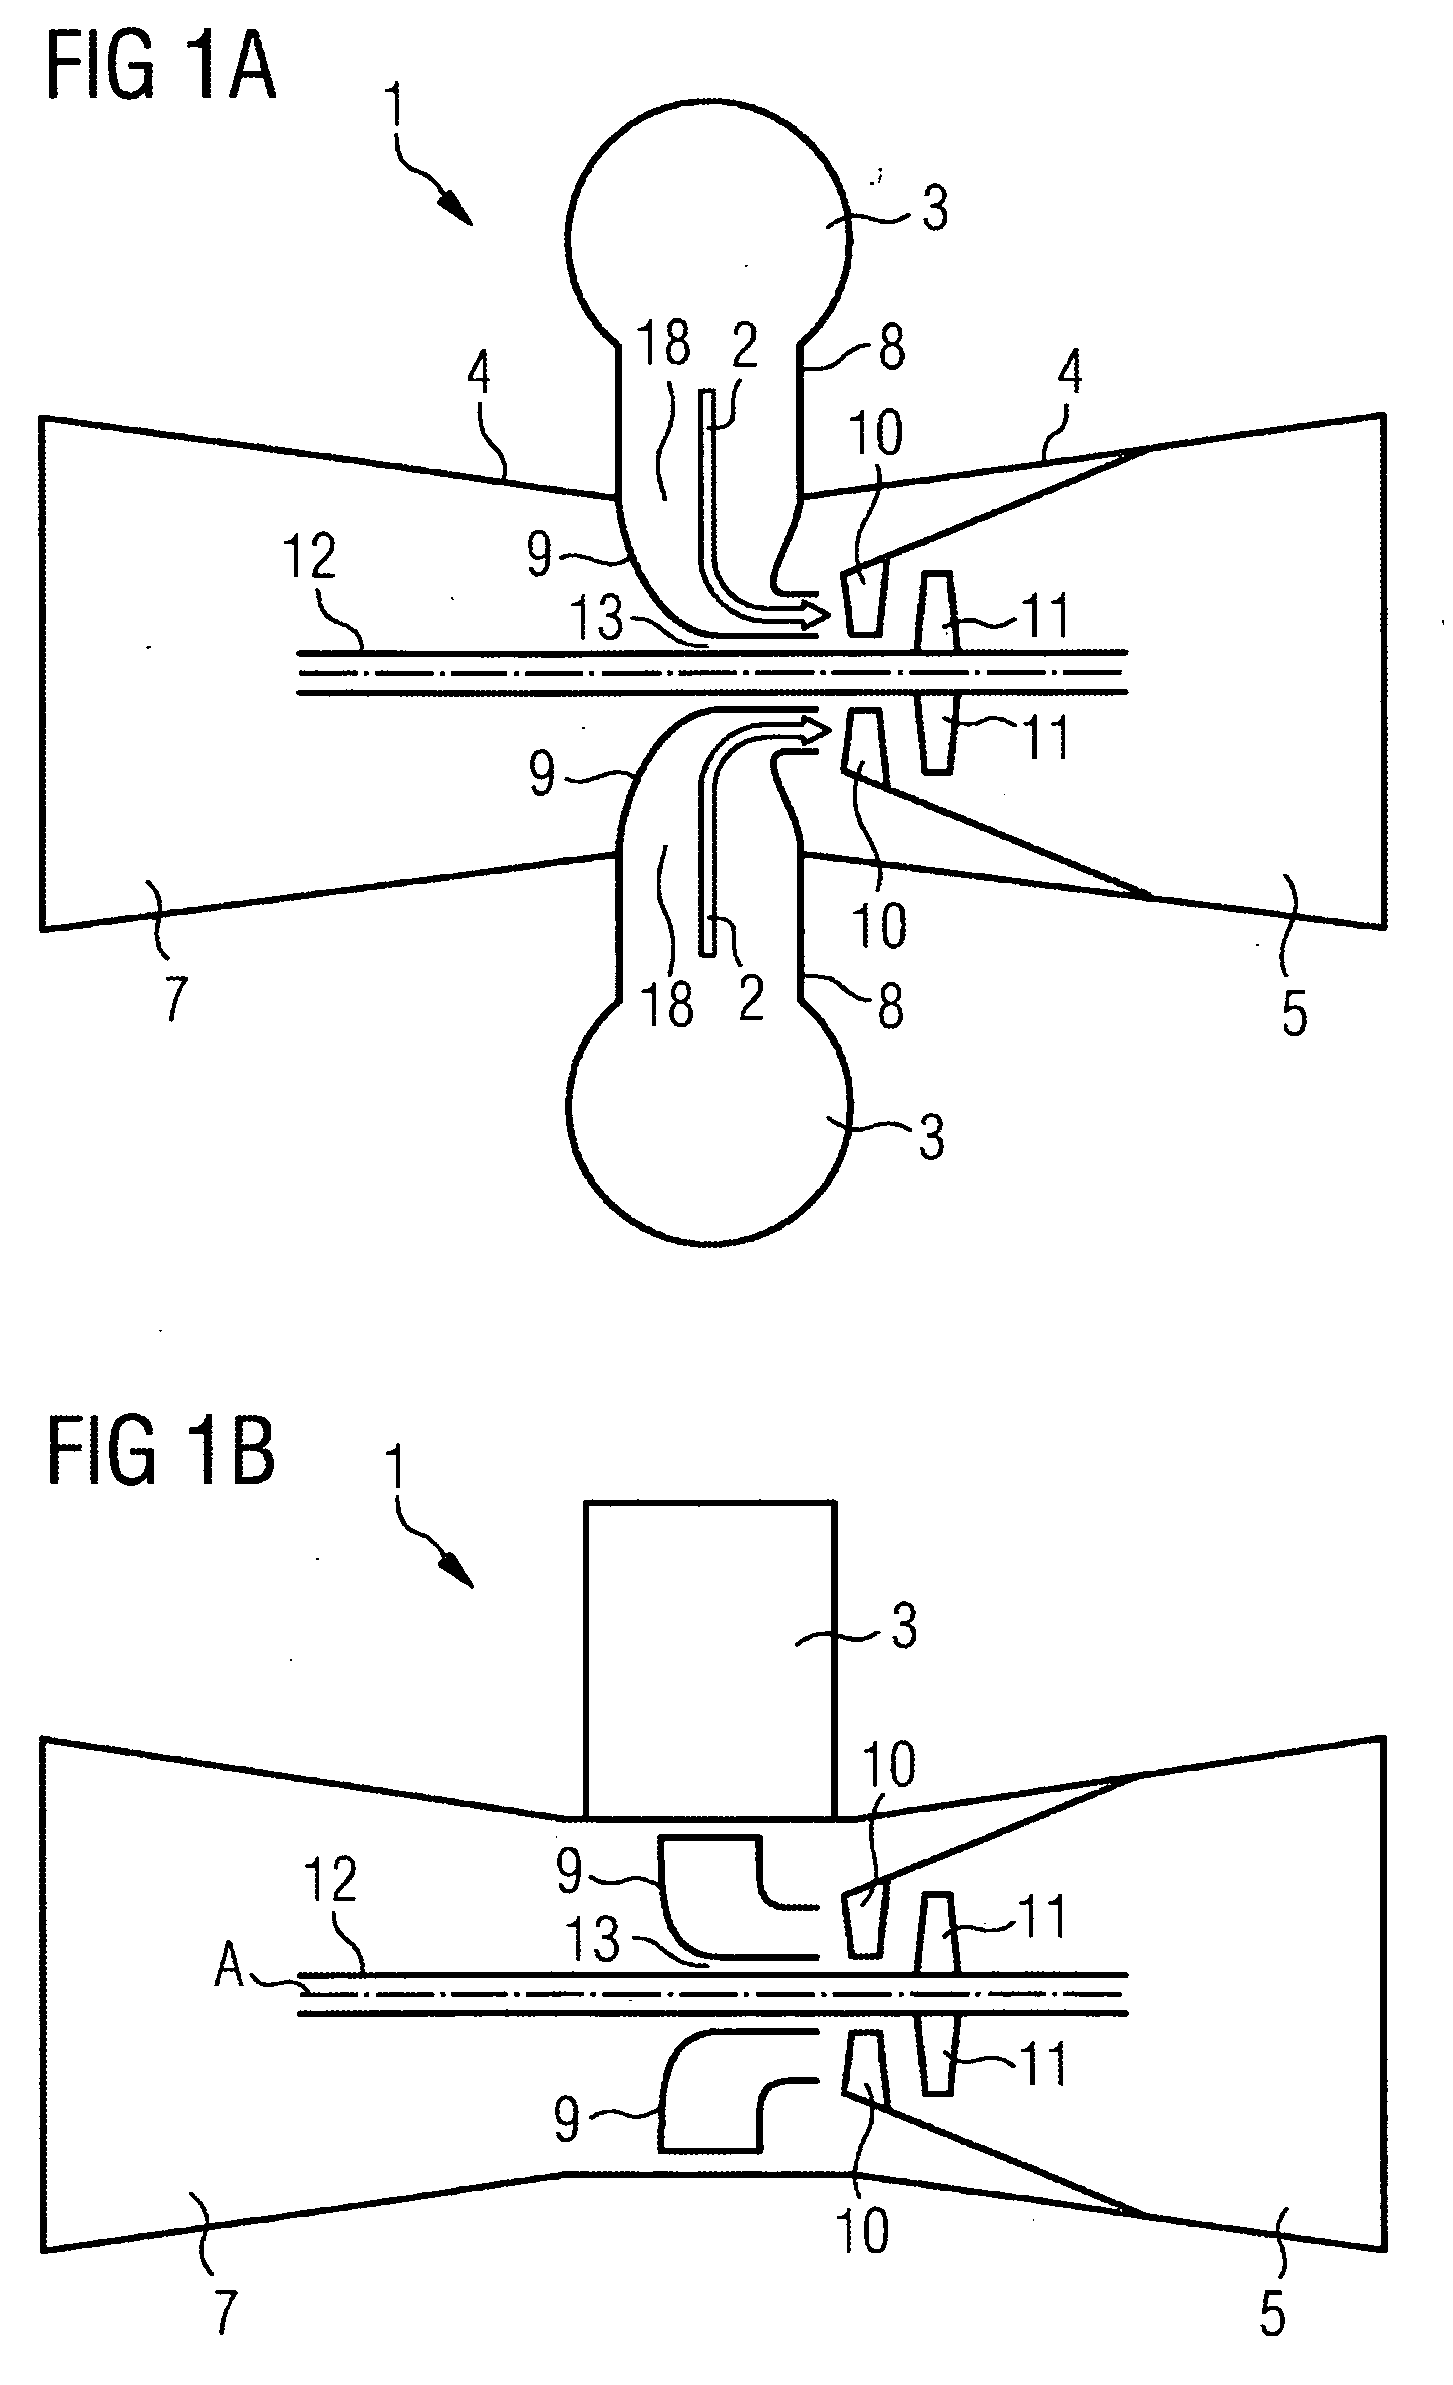 Hot-Gas-Ducting Housing Element, Protective Shaft Jacket and Gas Turbine System